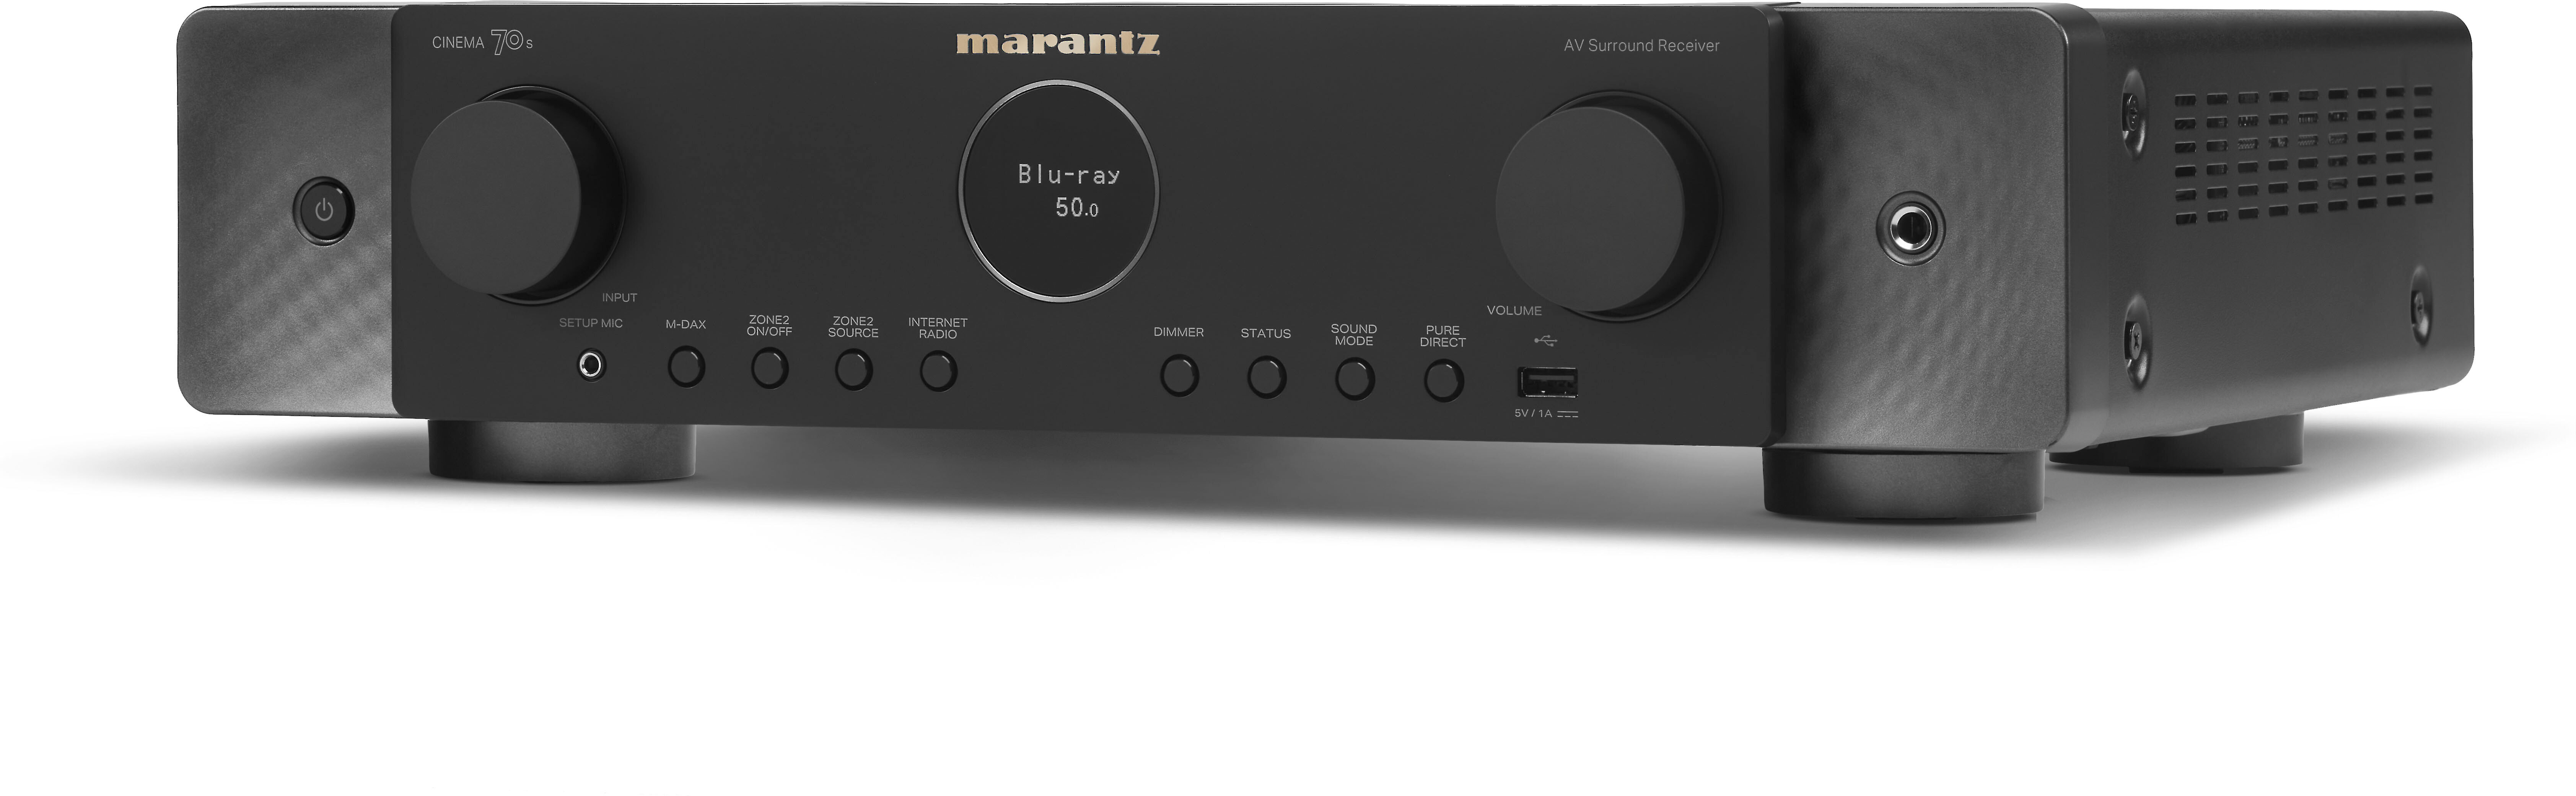 Customer Reviews: Bluetooth®, at Alexa Dolby Cinema Crutchfield Amazon 2, 70s Atmos®, AirPlay® and with theater 7.2-channel receiver slimline Marantz home Apple® compatibility